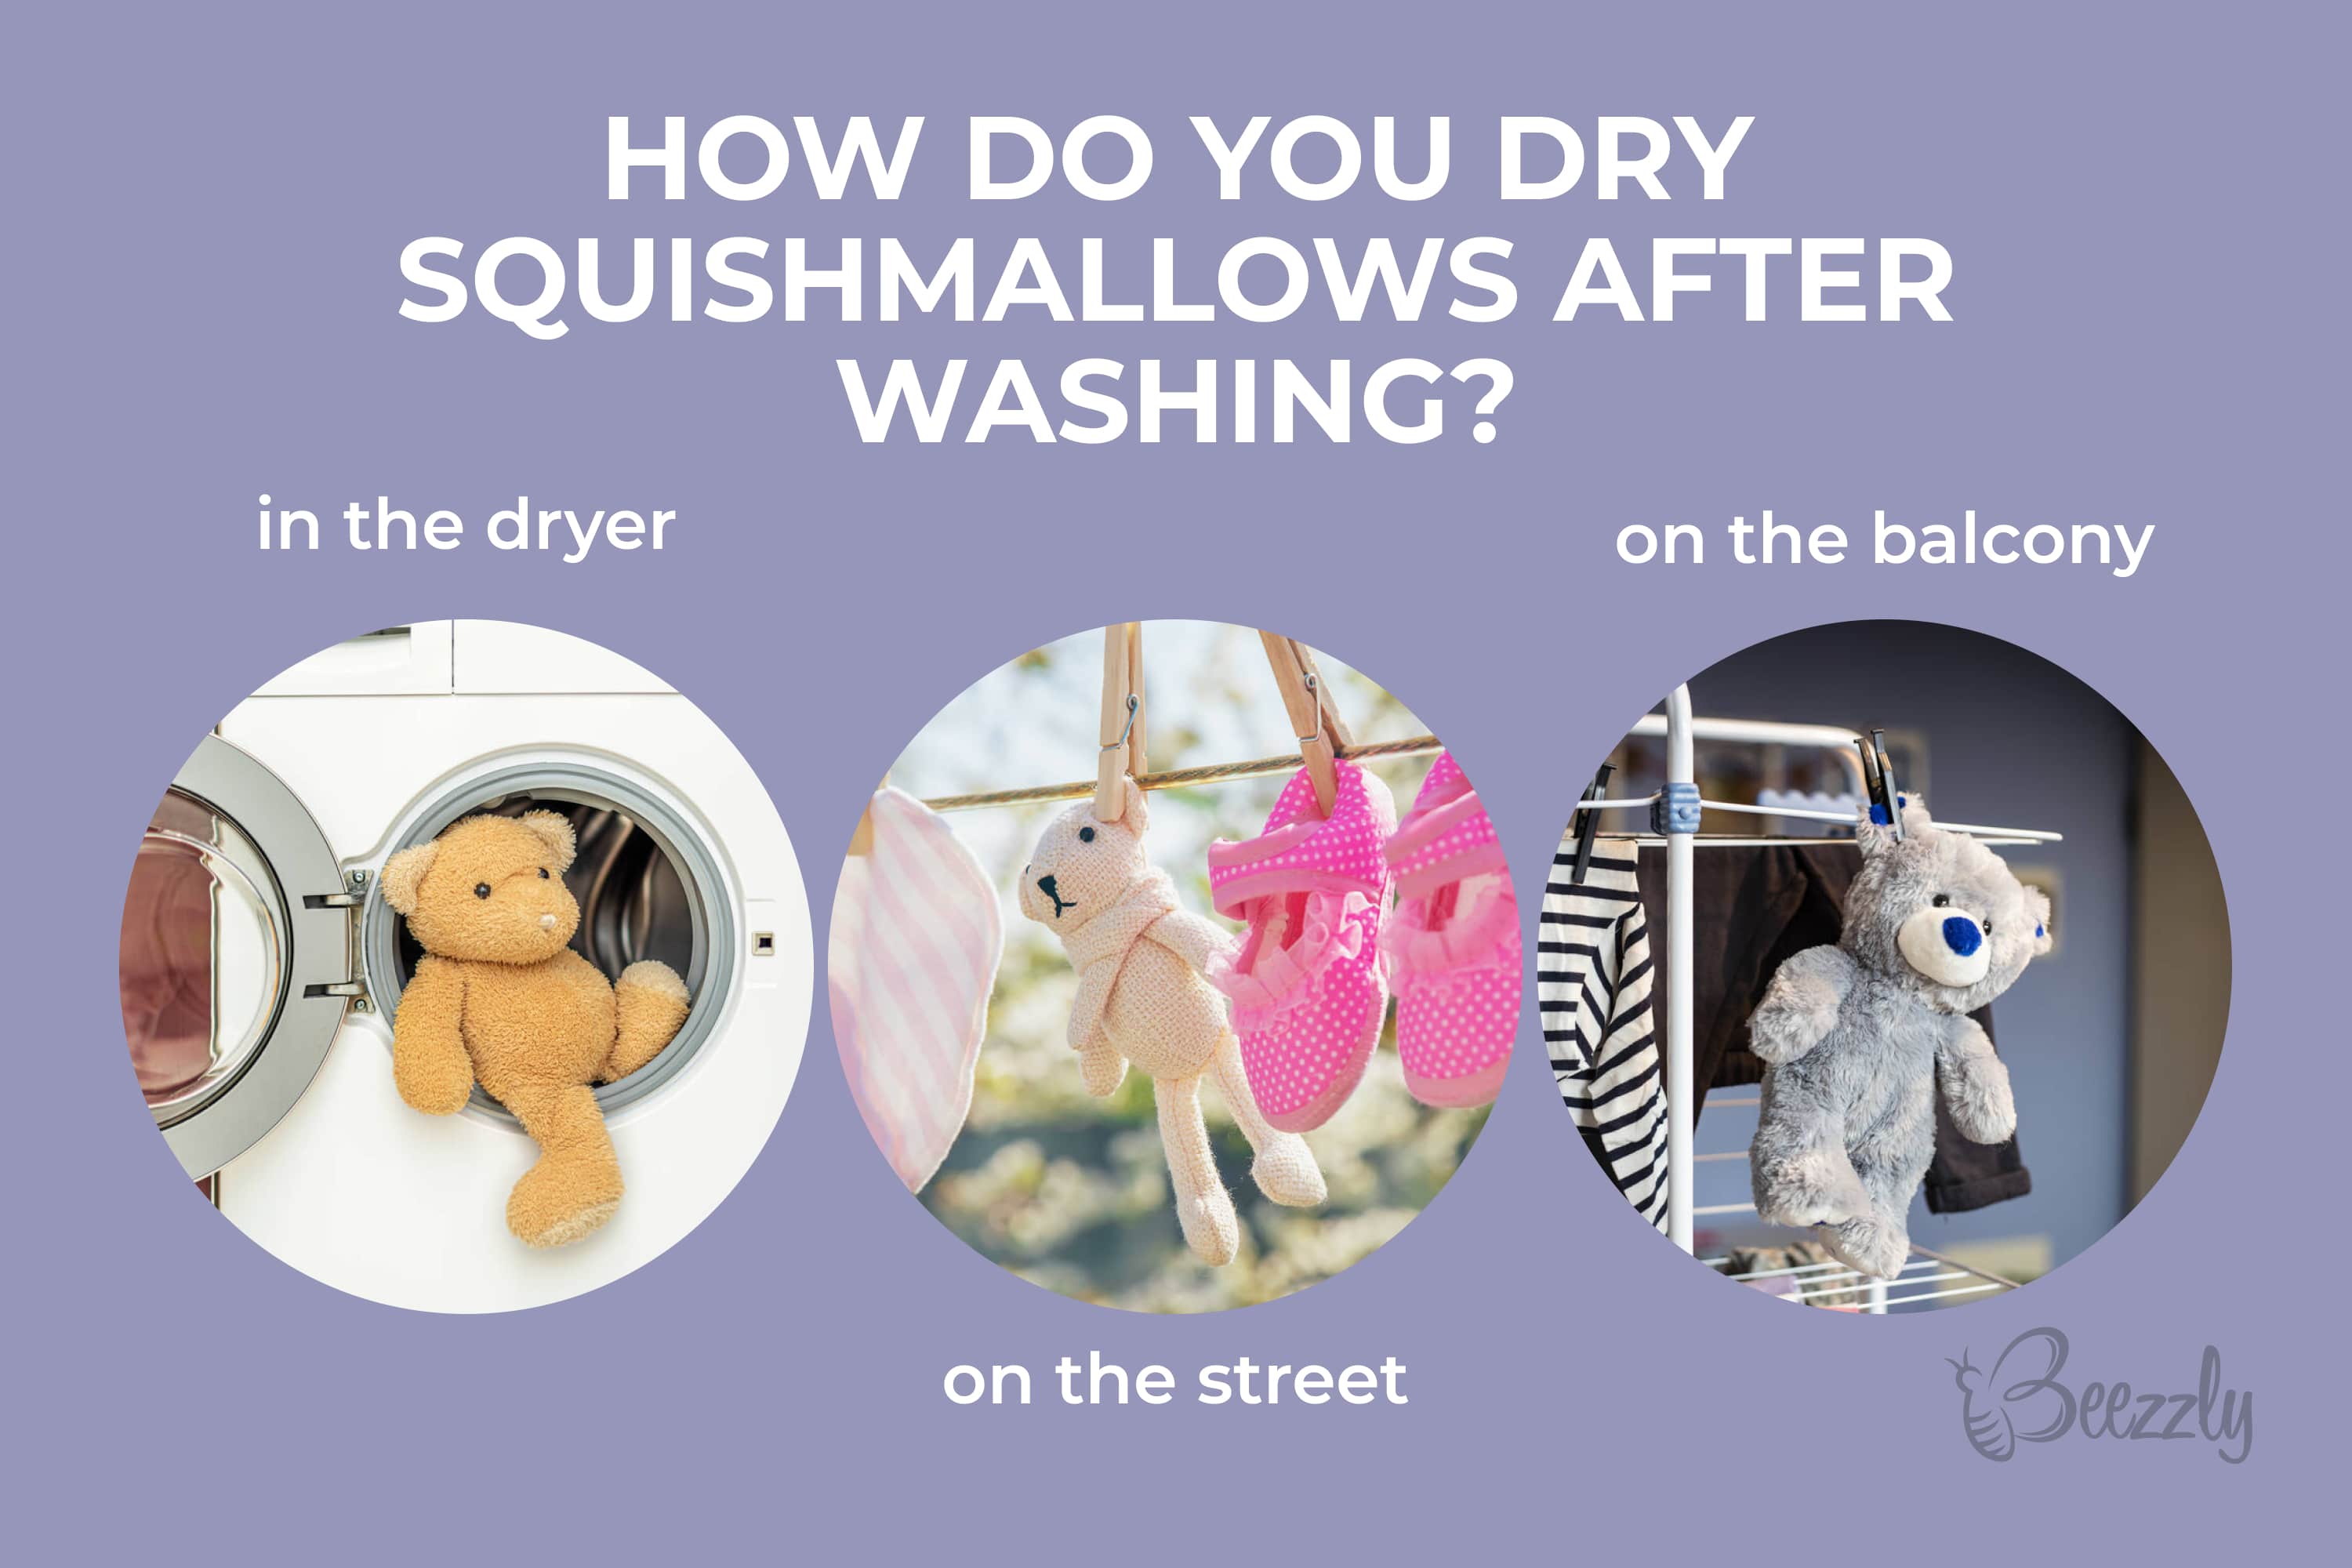 How do you dry Squishmallows after washing